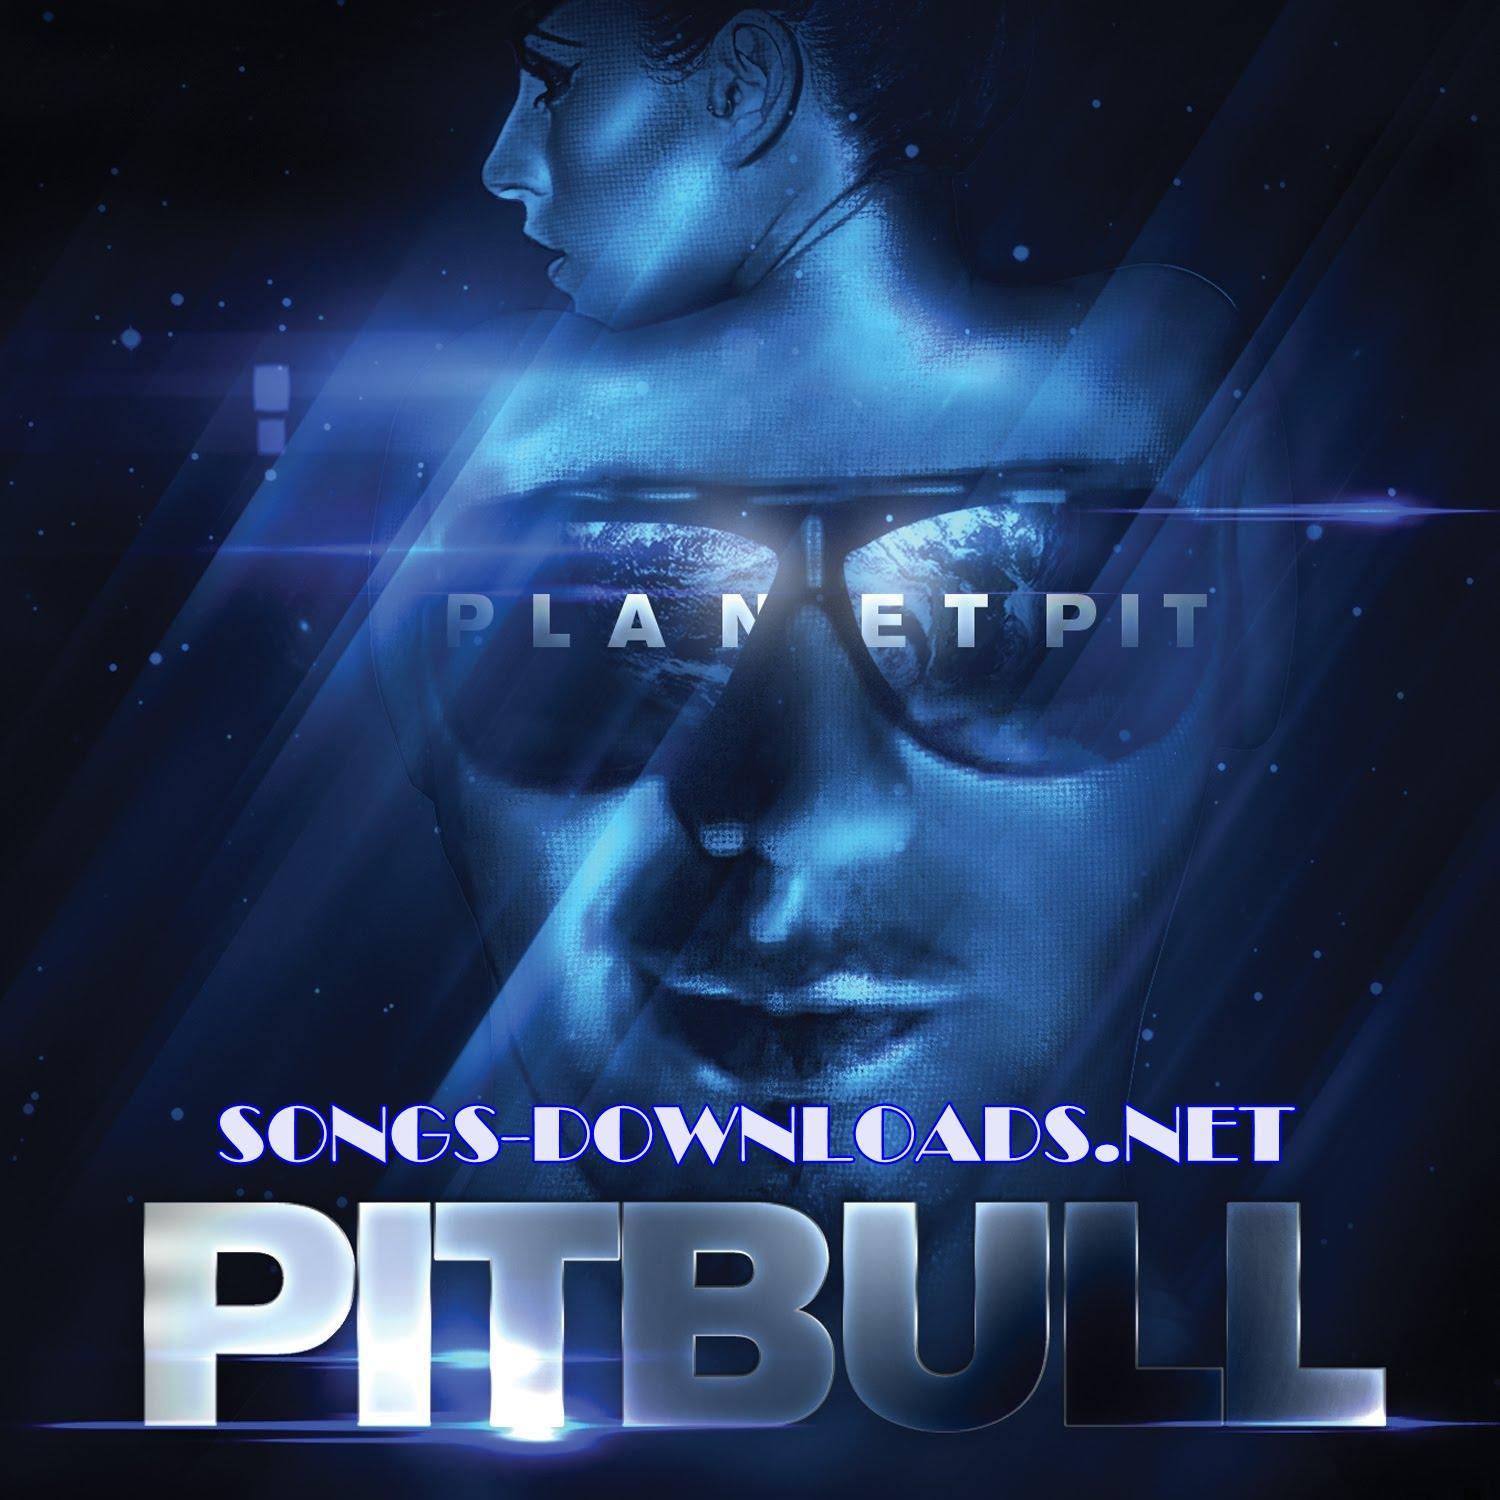 Pitbull+feat.+Enrique+Iglesias+%25E2%2580%2593+Come+N+Go+%2528Prod.+by+Max+Martin%2529+%2528NoTags%2529+song+download%252C+latest+pitbull+songs+download%252Cpitbull+remix+song+music+download%252C320kbps++song+download%252Cmusic%252Clisten+online%252Ccome+n++go+song